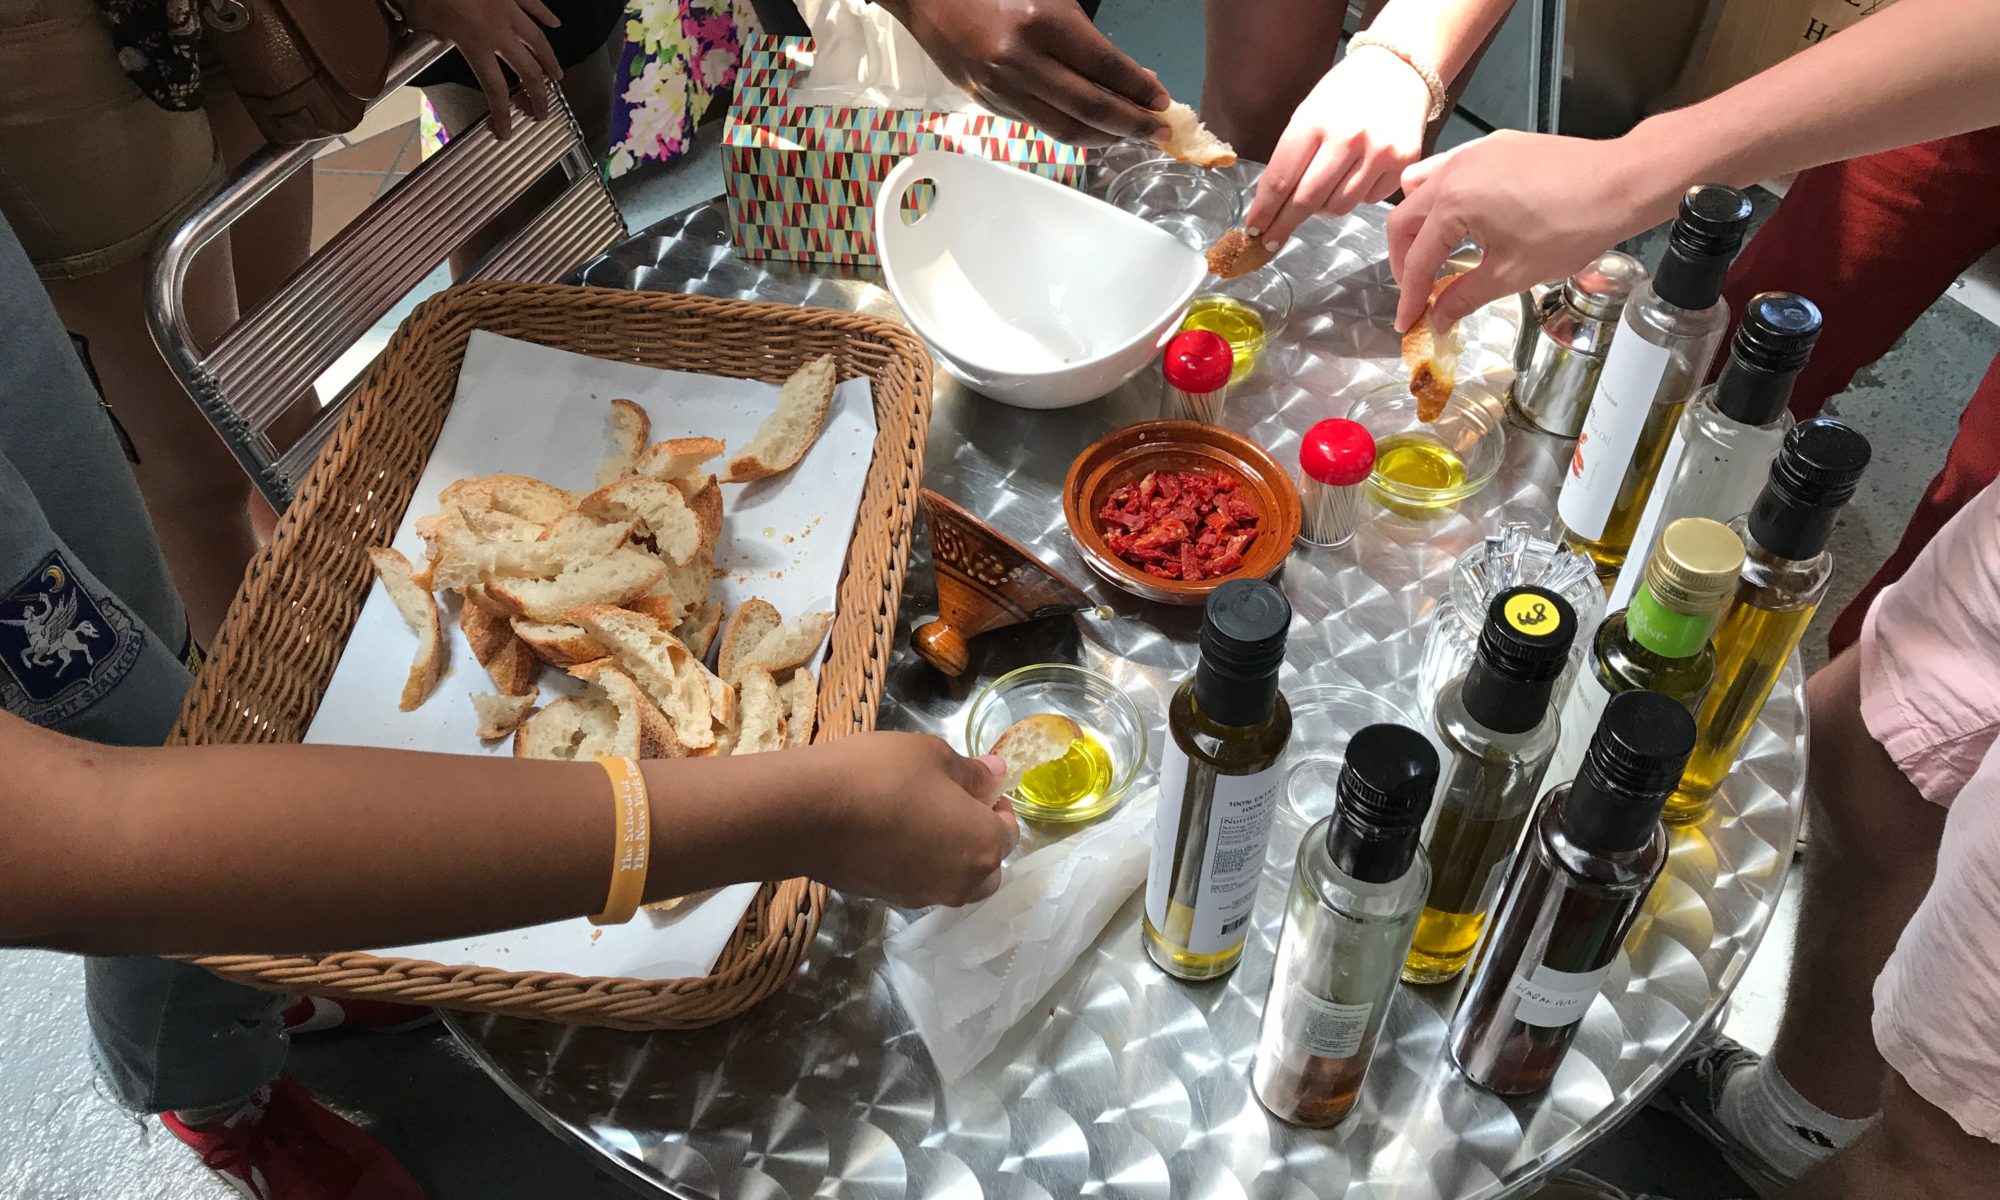 Four hands reaching in from different directions to dip bread into bowls of olive oil on a table with a spread of various olive oils, vinegars, and a bread basket